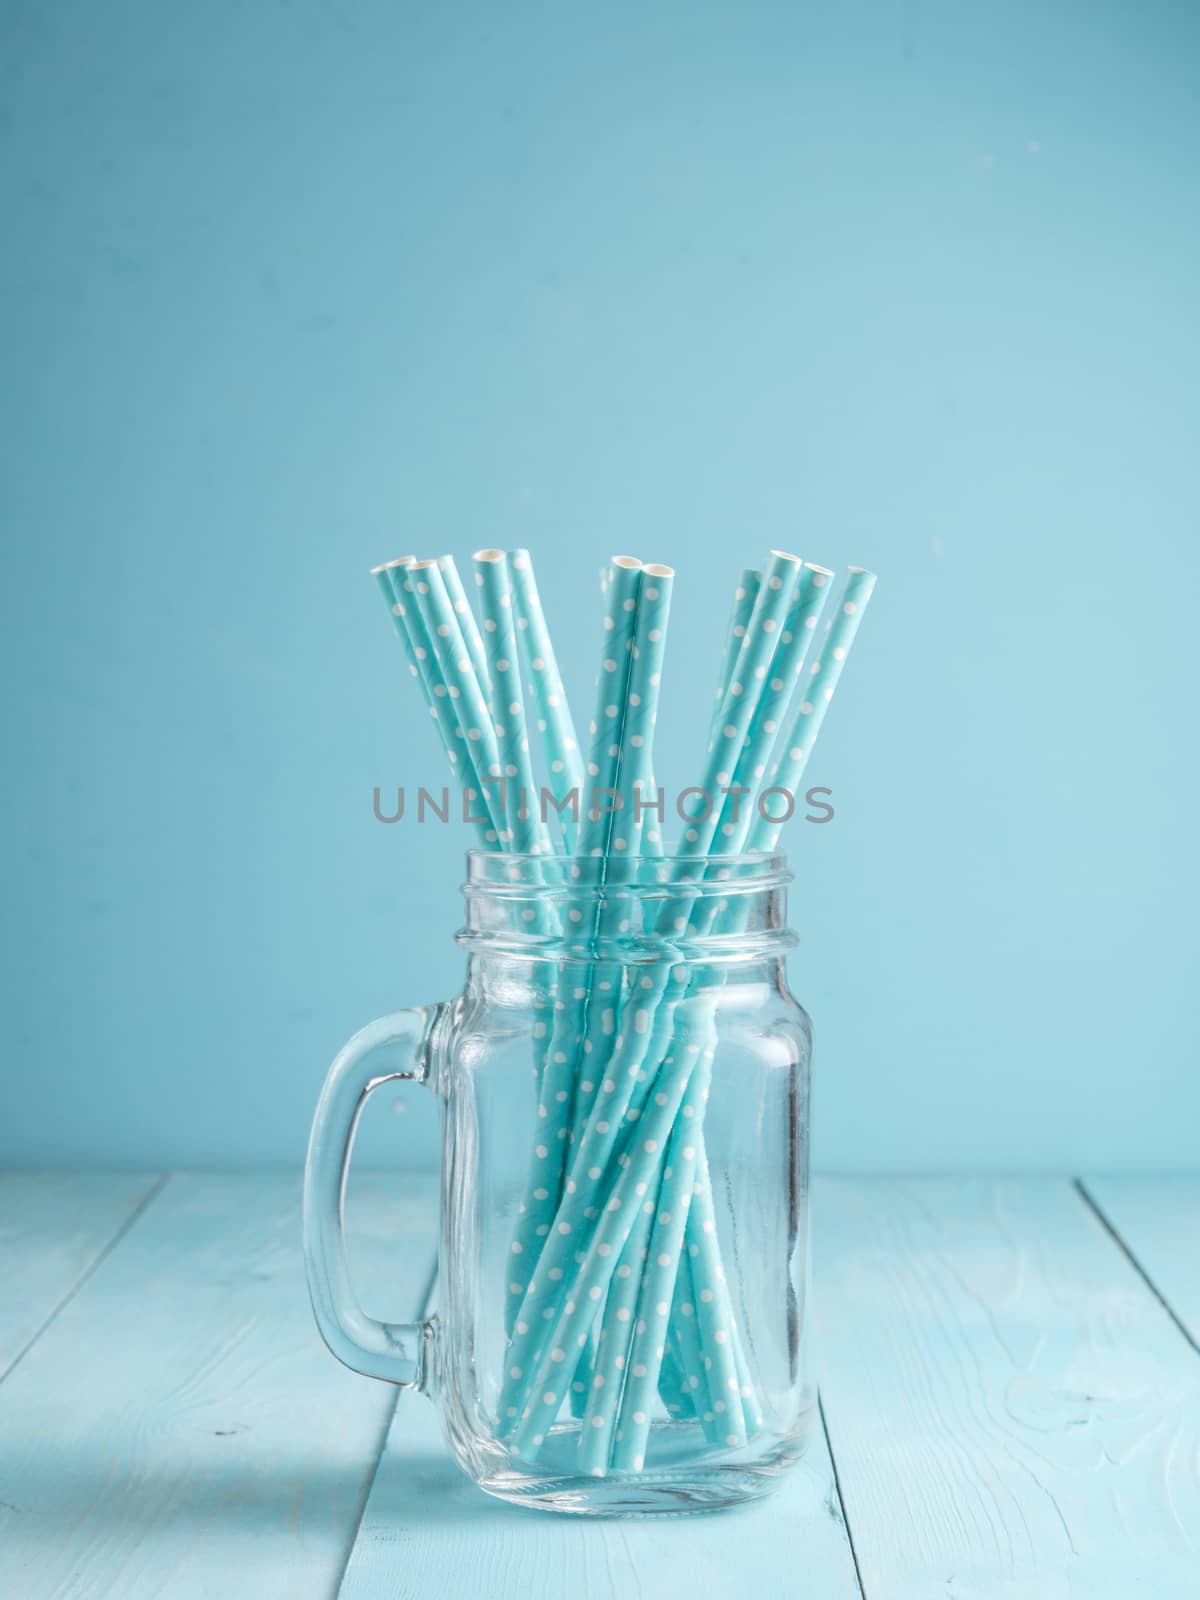 Mason jars with blue paper straws on blue wooden background. Ideal for summer drinks and smoothies. Vertical. Copy space